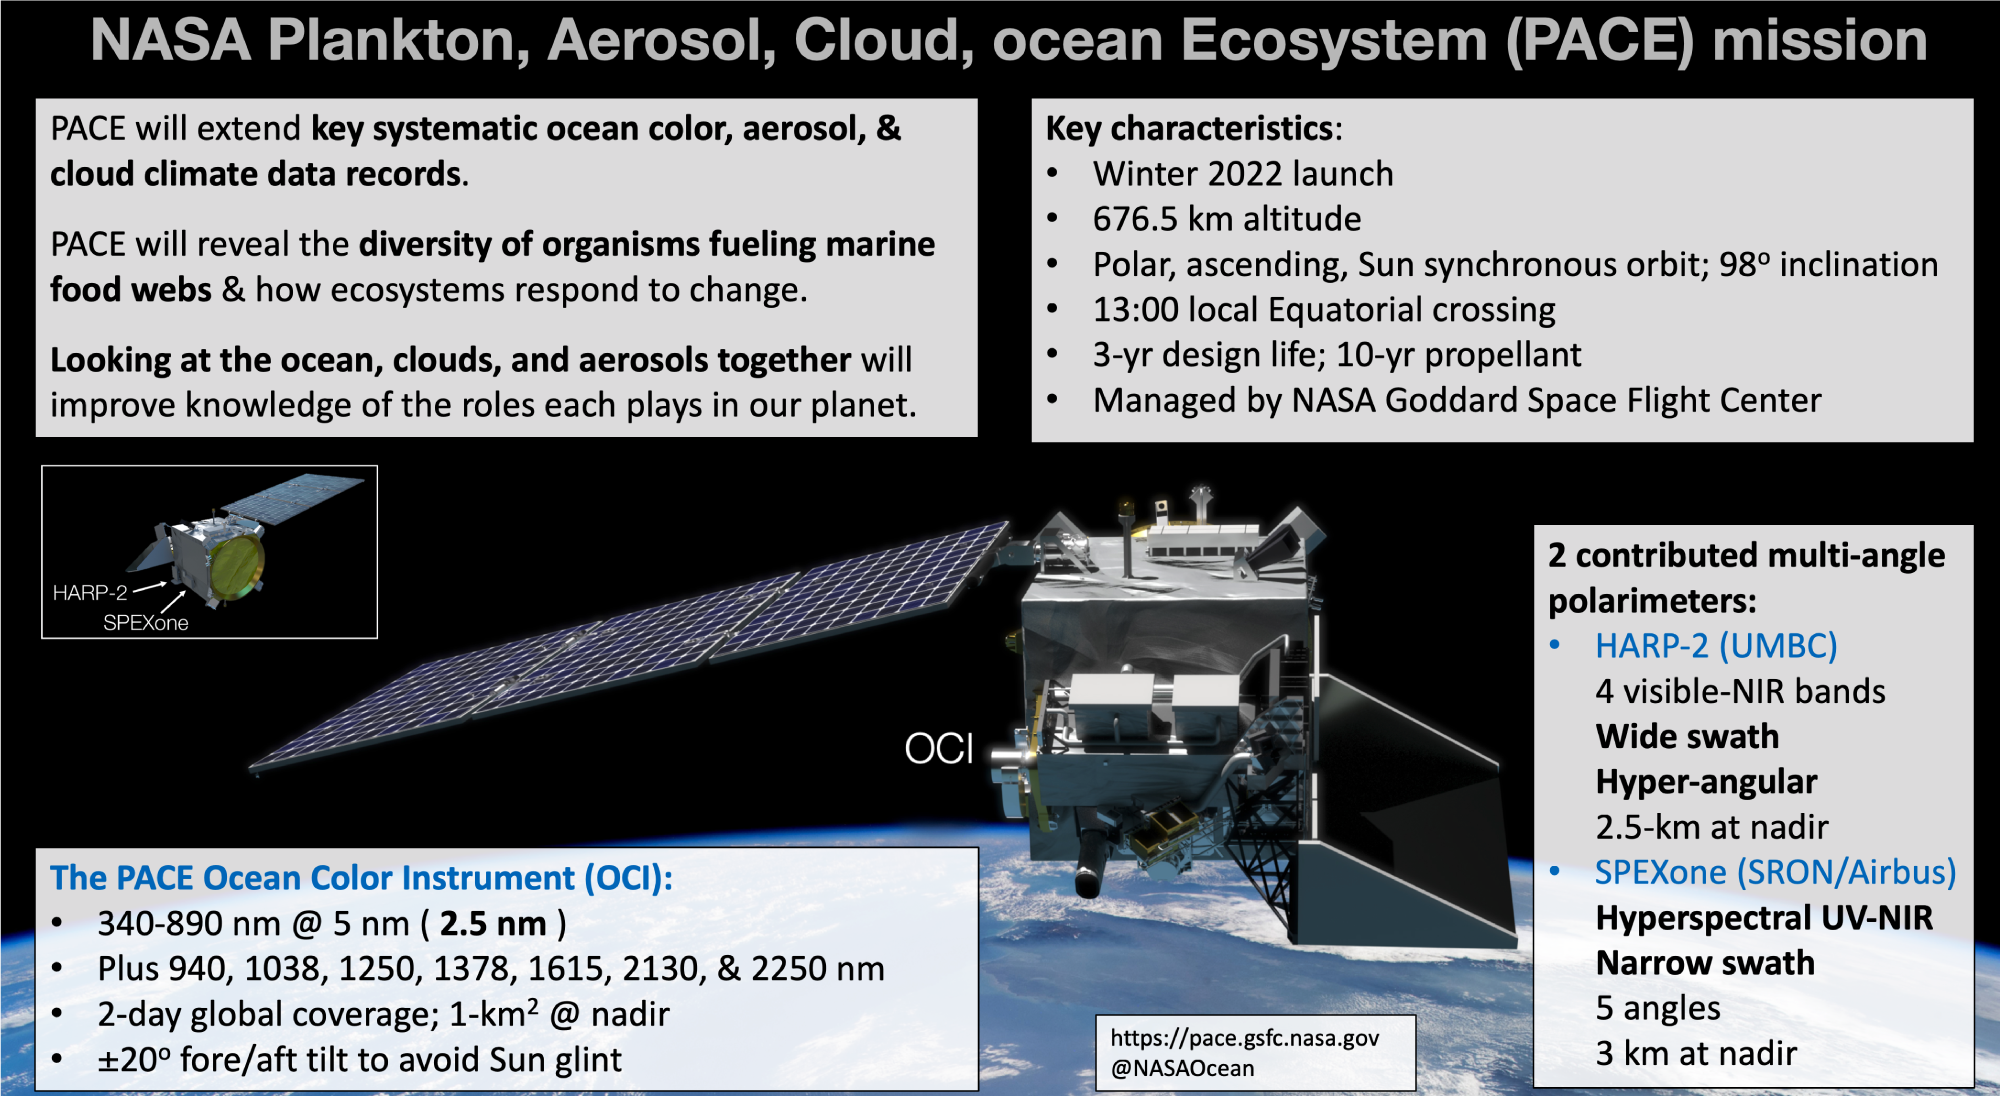 An overview of the PACE Mission provided by Jeremy Werdell, Project Scientist.